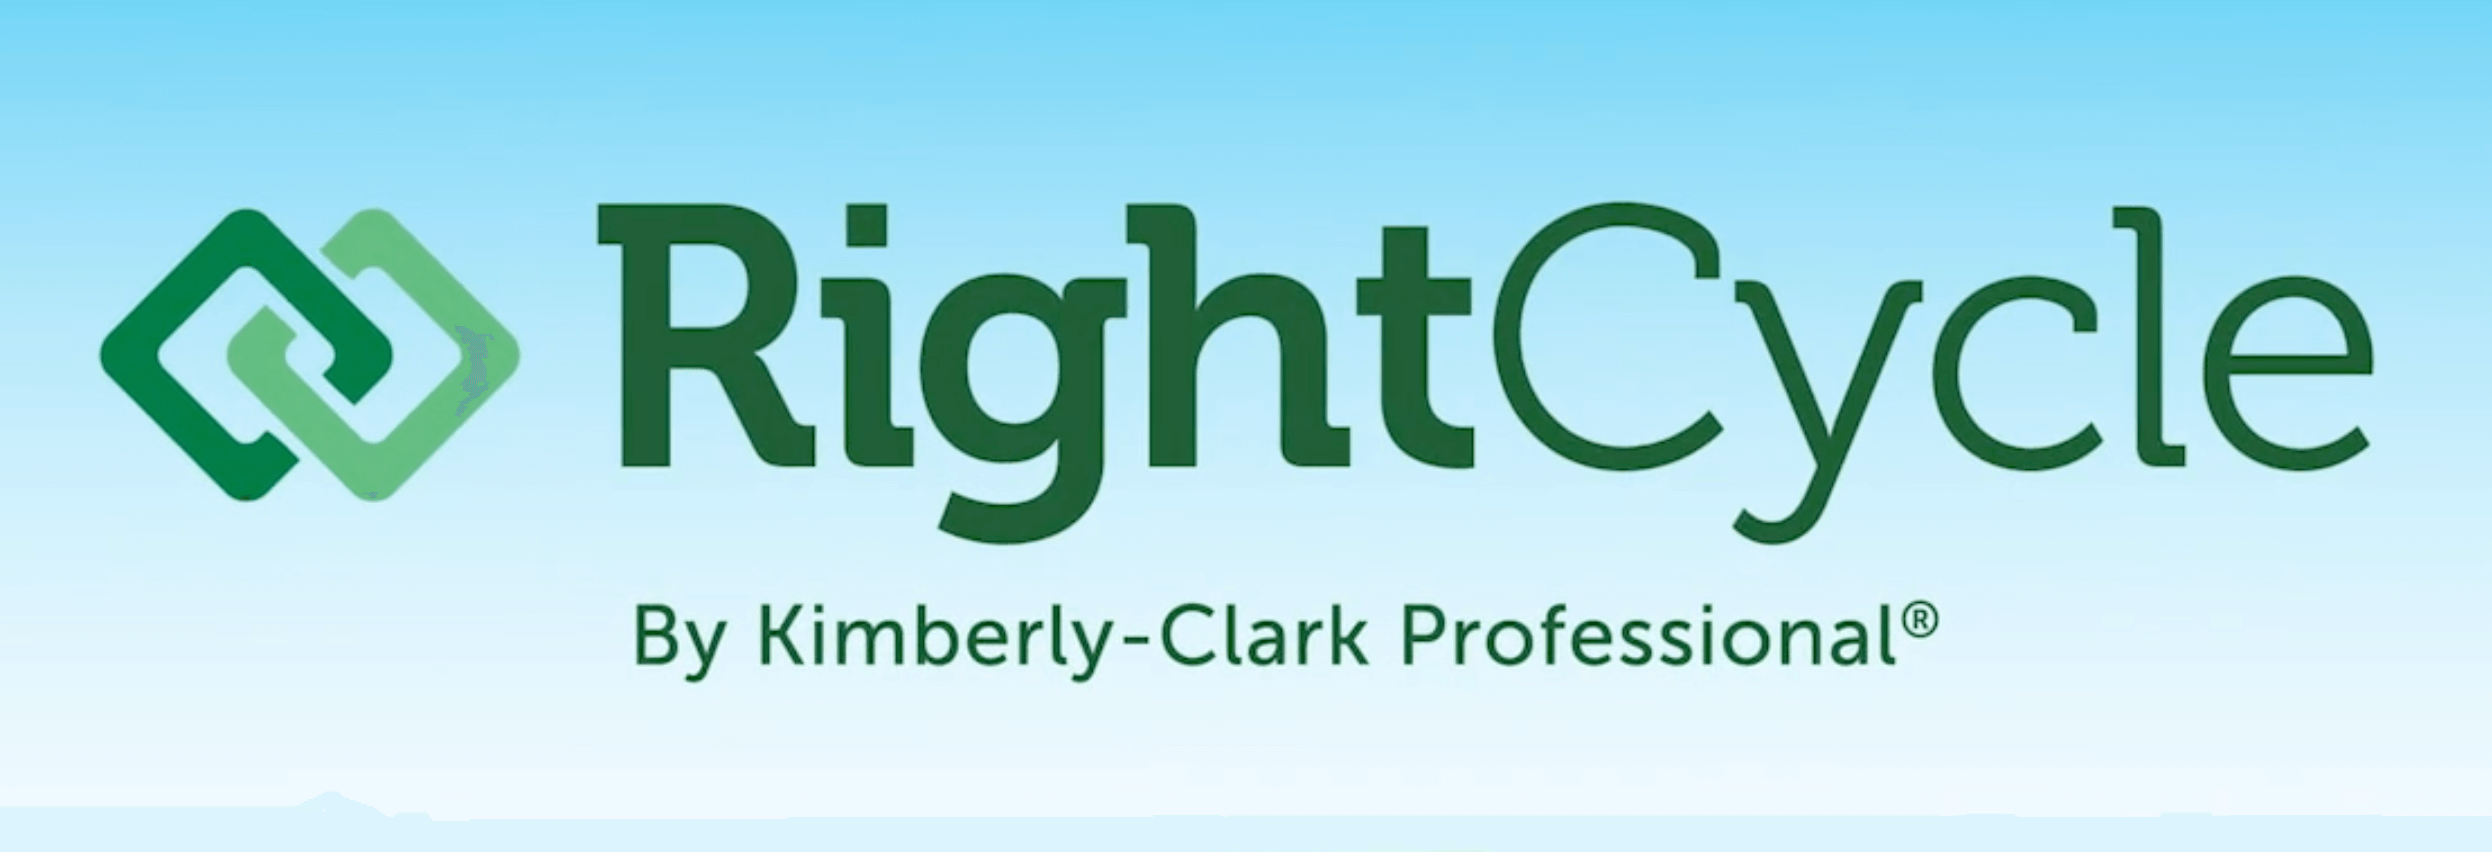 Kimberly-Clark Professional's RightCycle program focuses on recycling personal protective equipment (PPE)